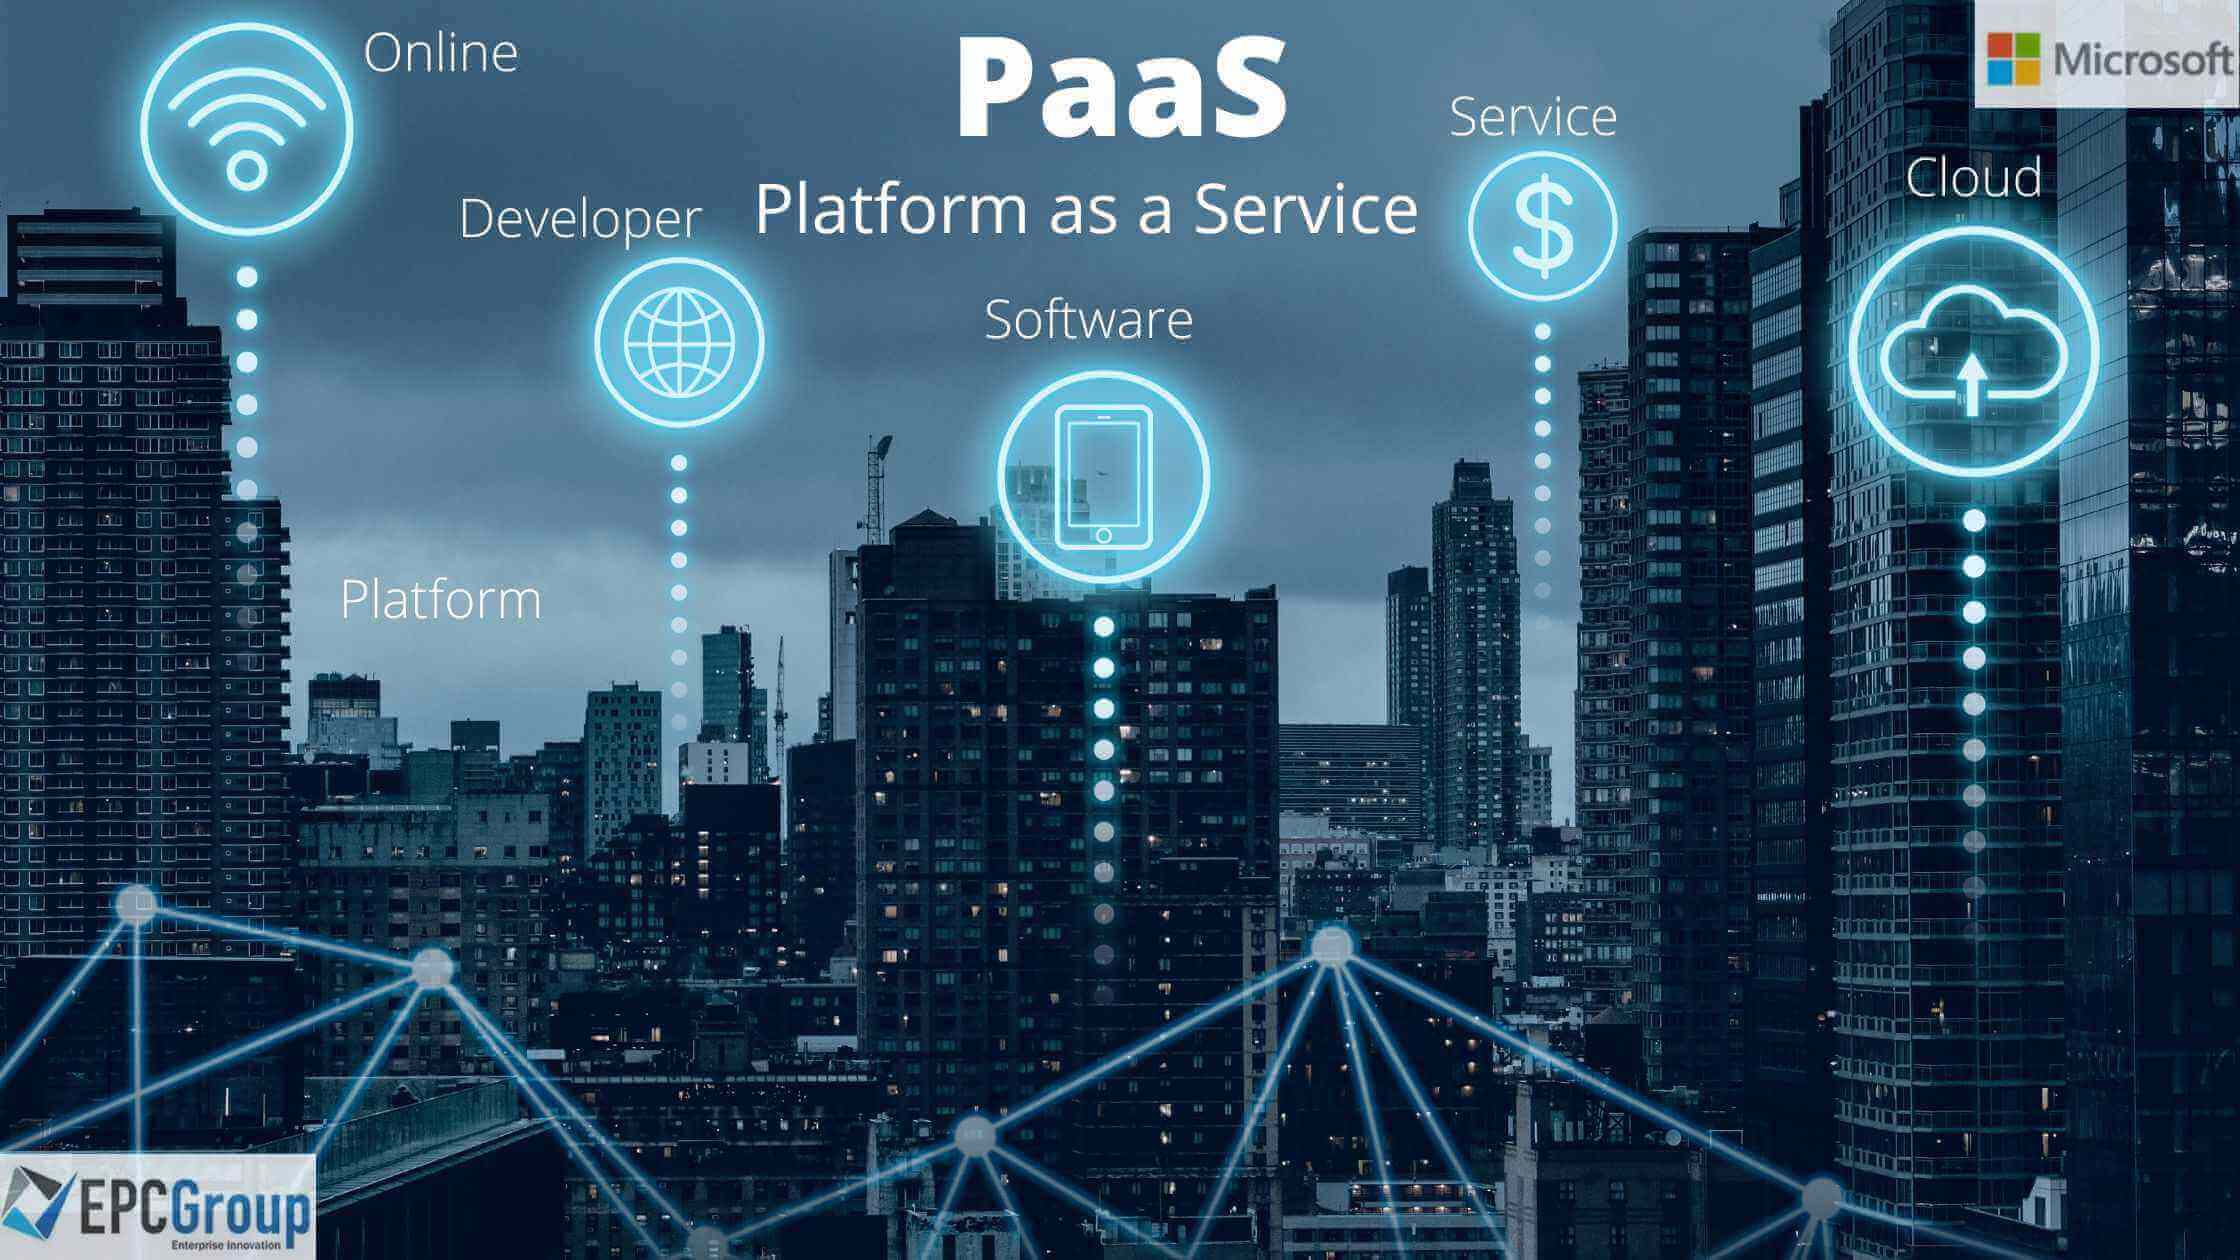 Why Microsoft Azure PaaS for emerging developers?